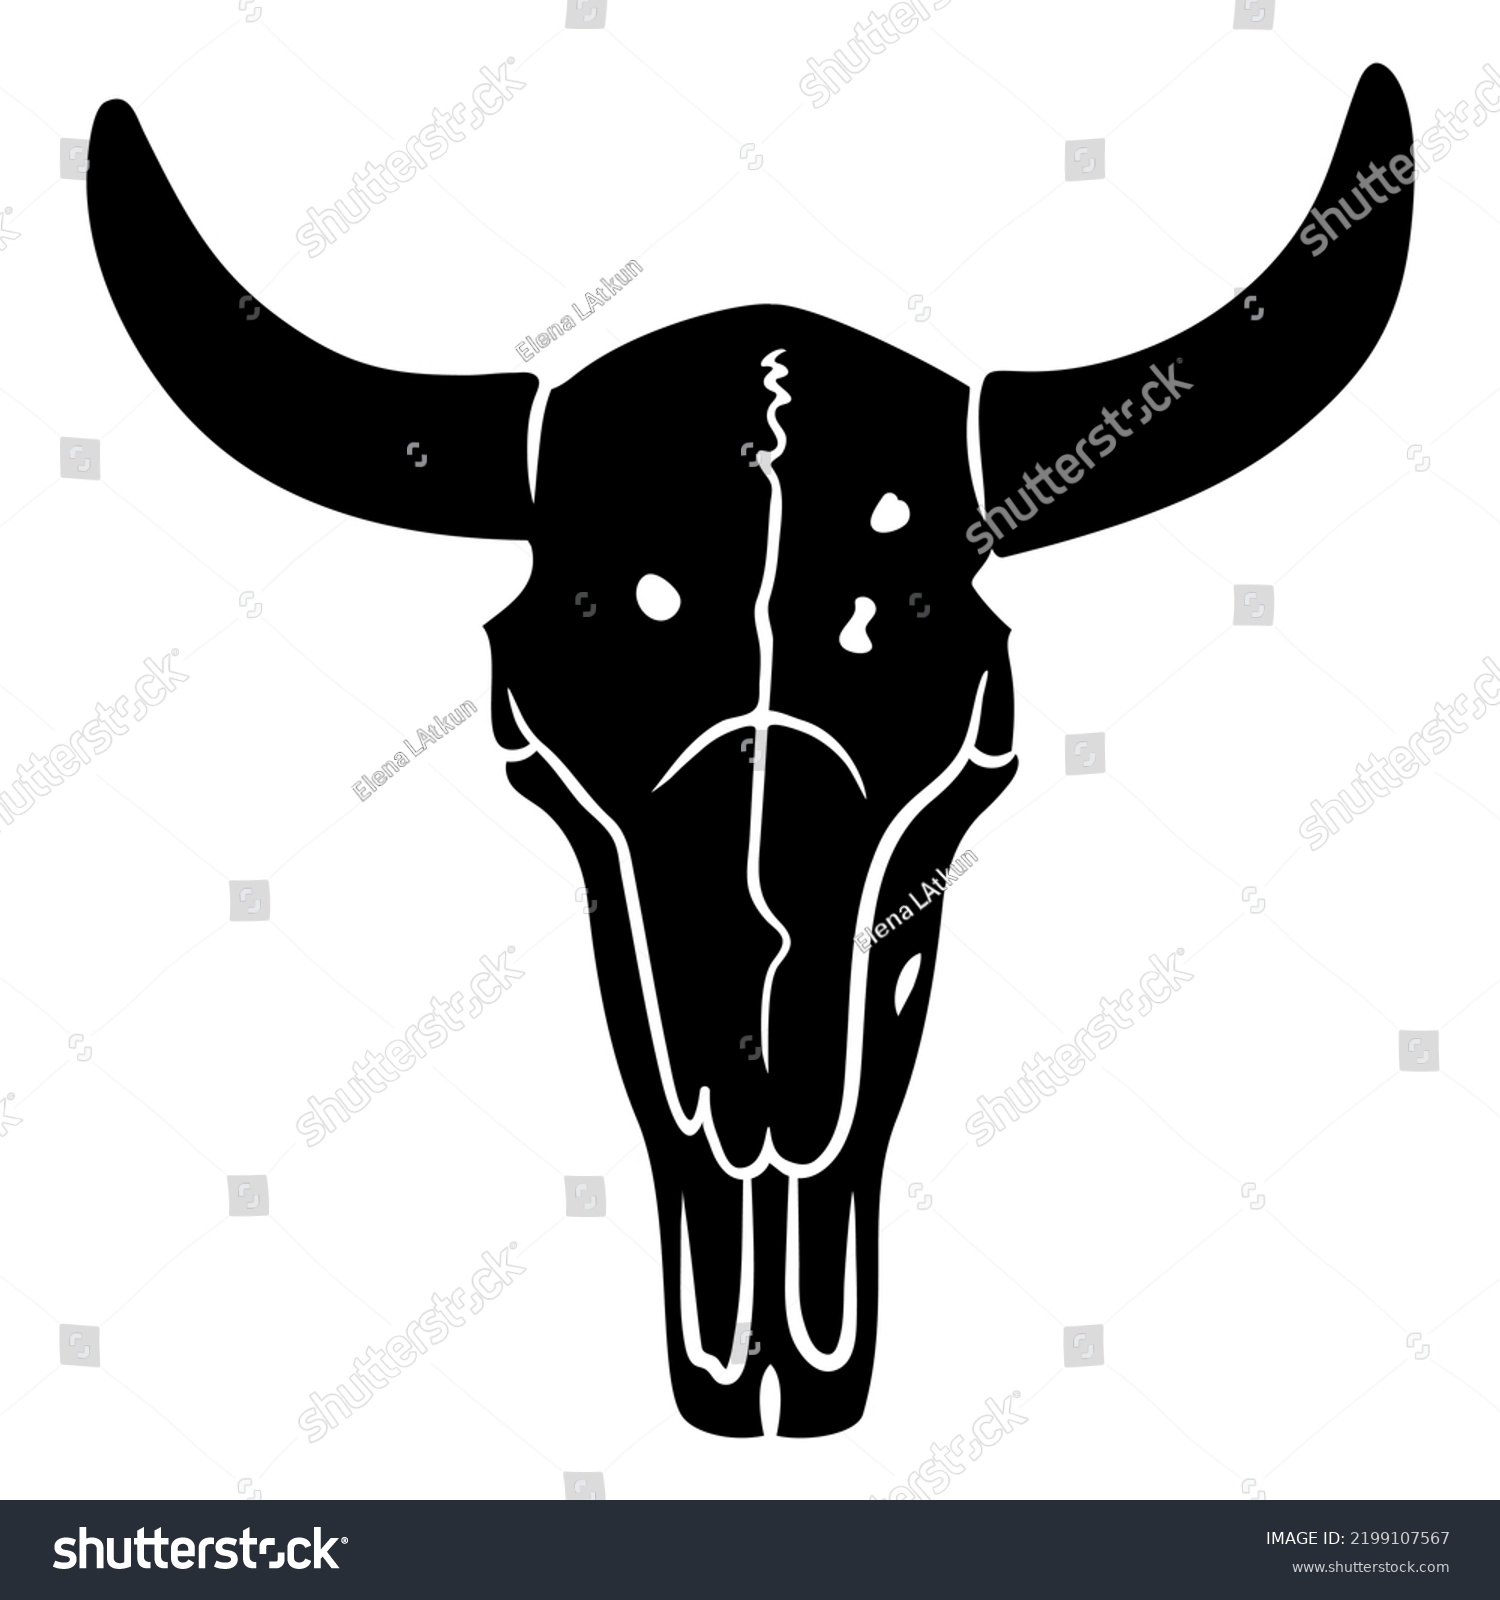 SVG of Bull Skull Cut Out. High quality vector svg